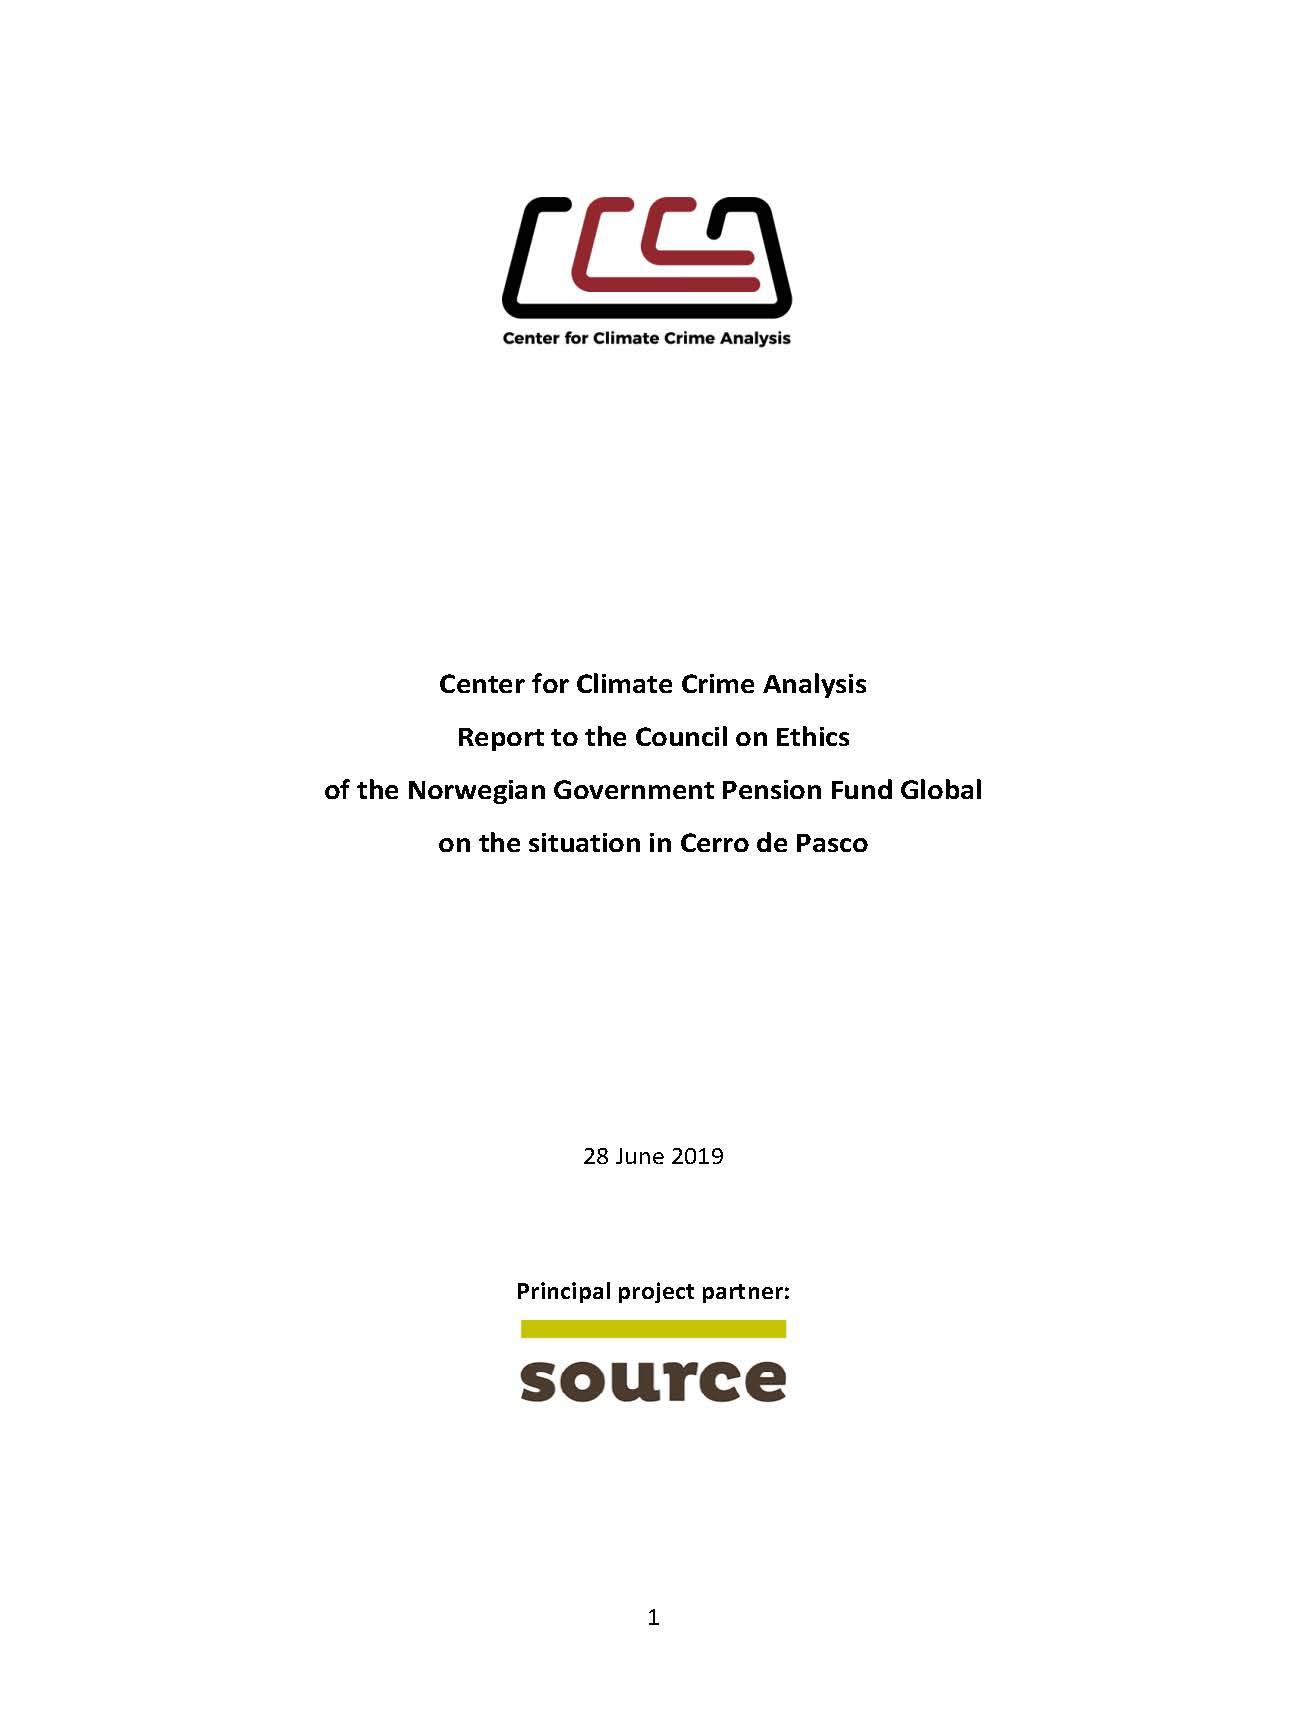 Cover of Center for Climate Crime Analysis Report to the Council on Ethics of the Norwegian Government Pension Fund Global on the situation in Cerro de Pasco